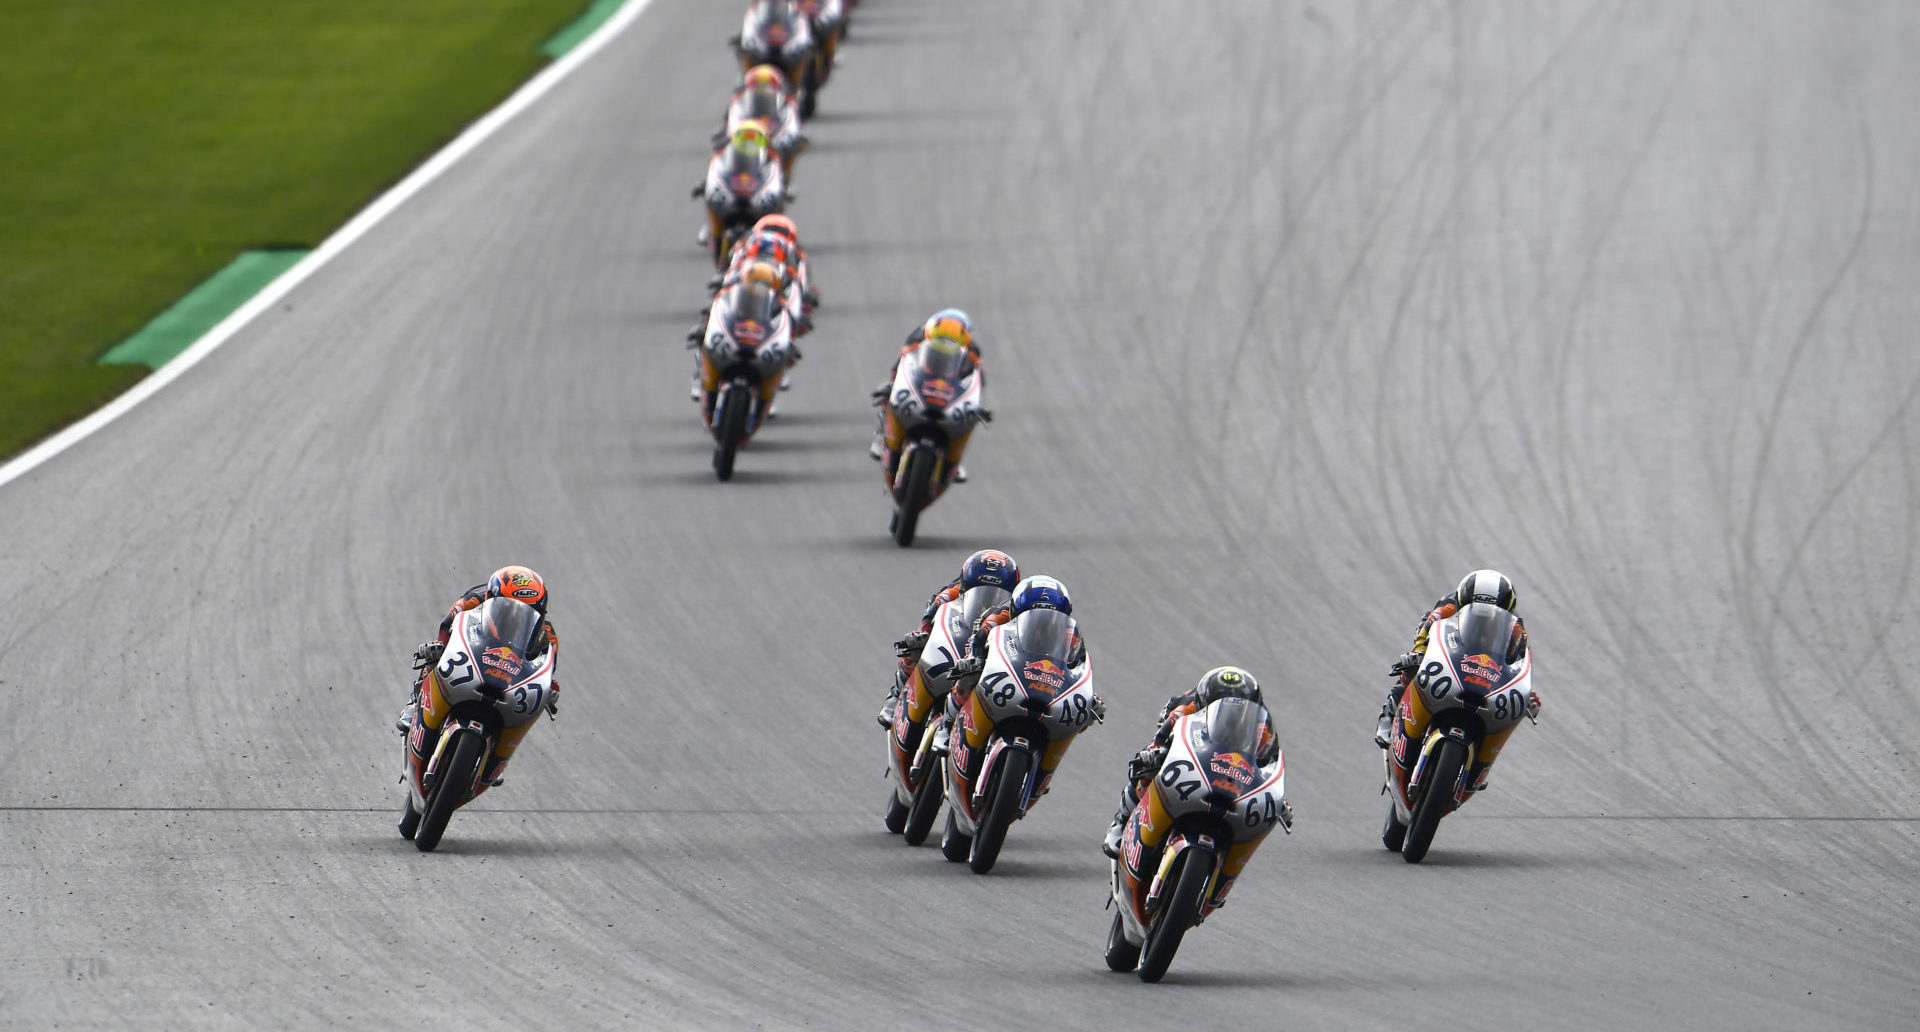 David Munoz (64) leads the field during Red Bull MotoGP Rookies Cup Race One at Red Bull Ring II. Photo courtesy Red Bull.